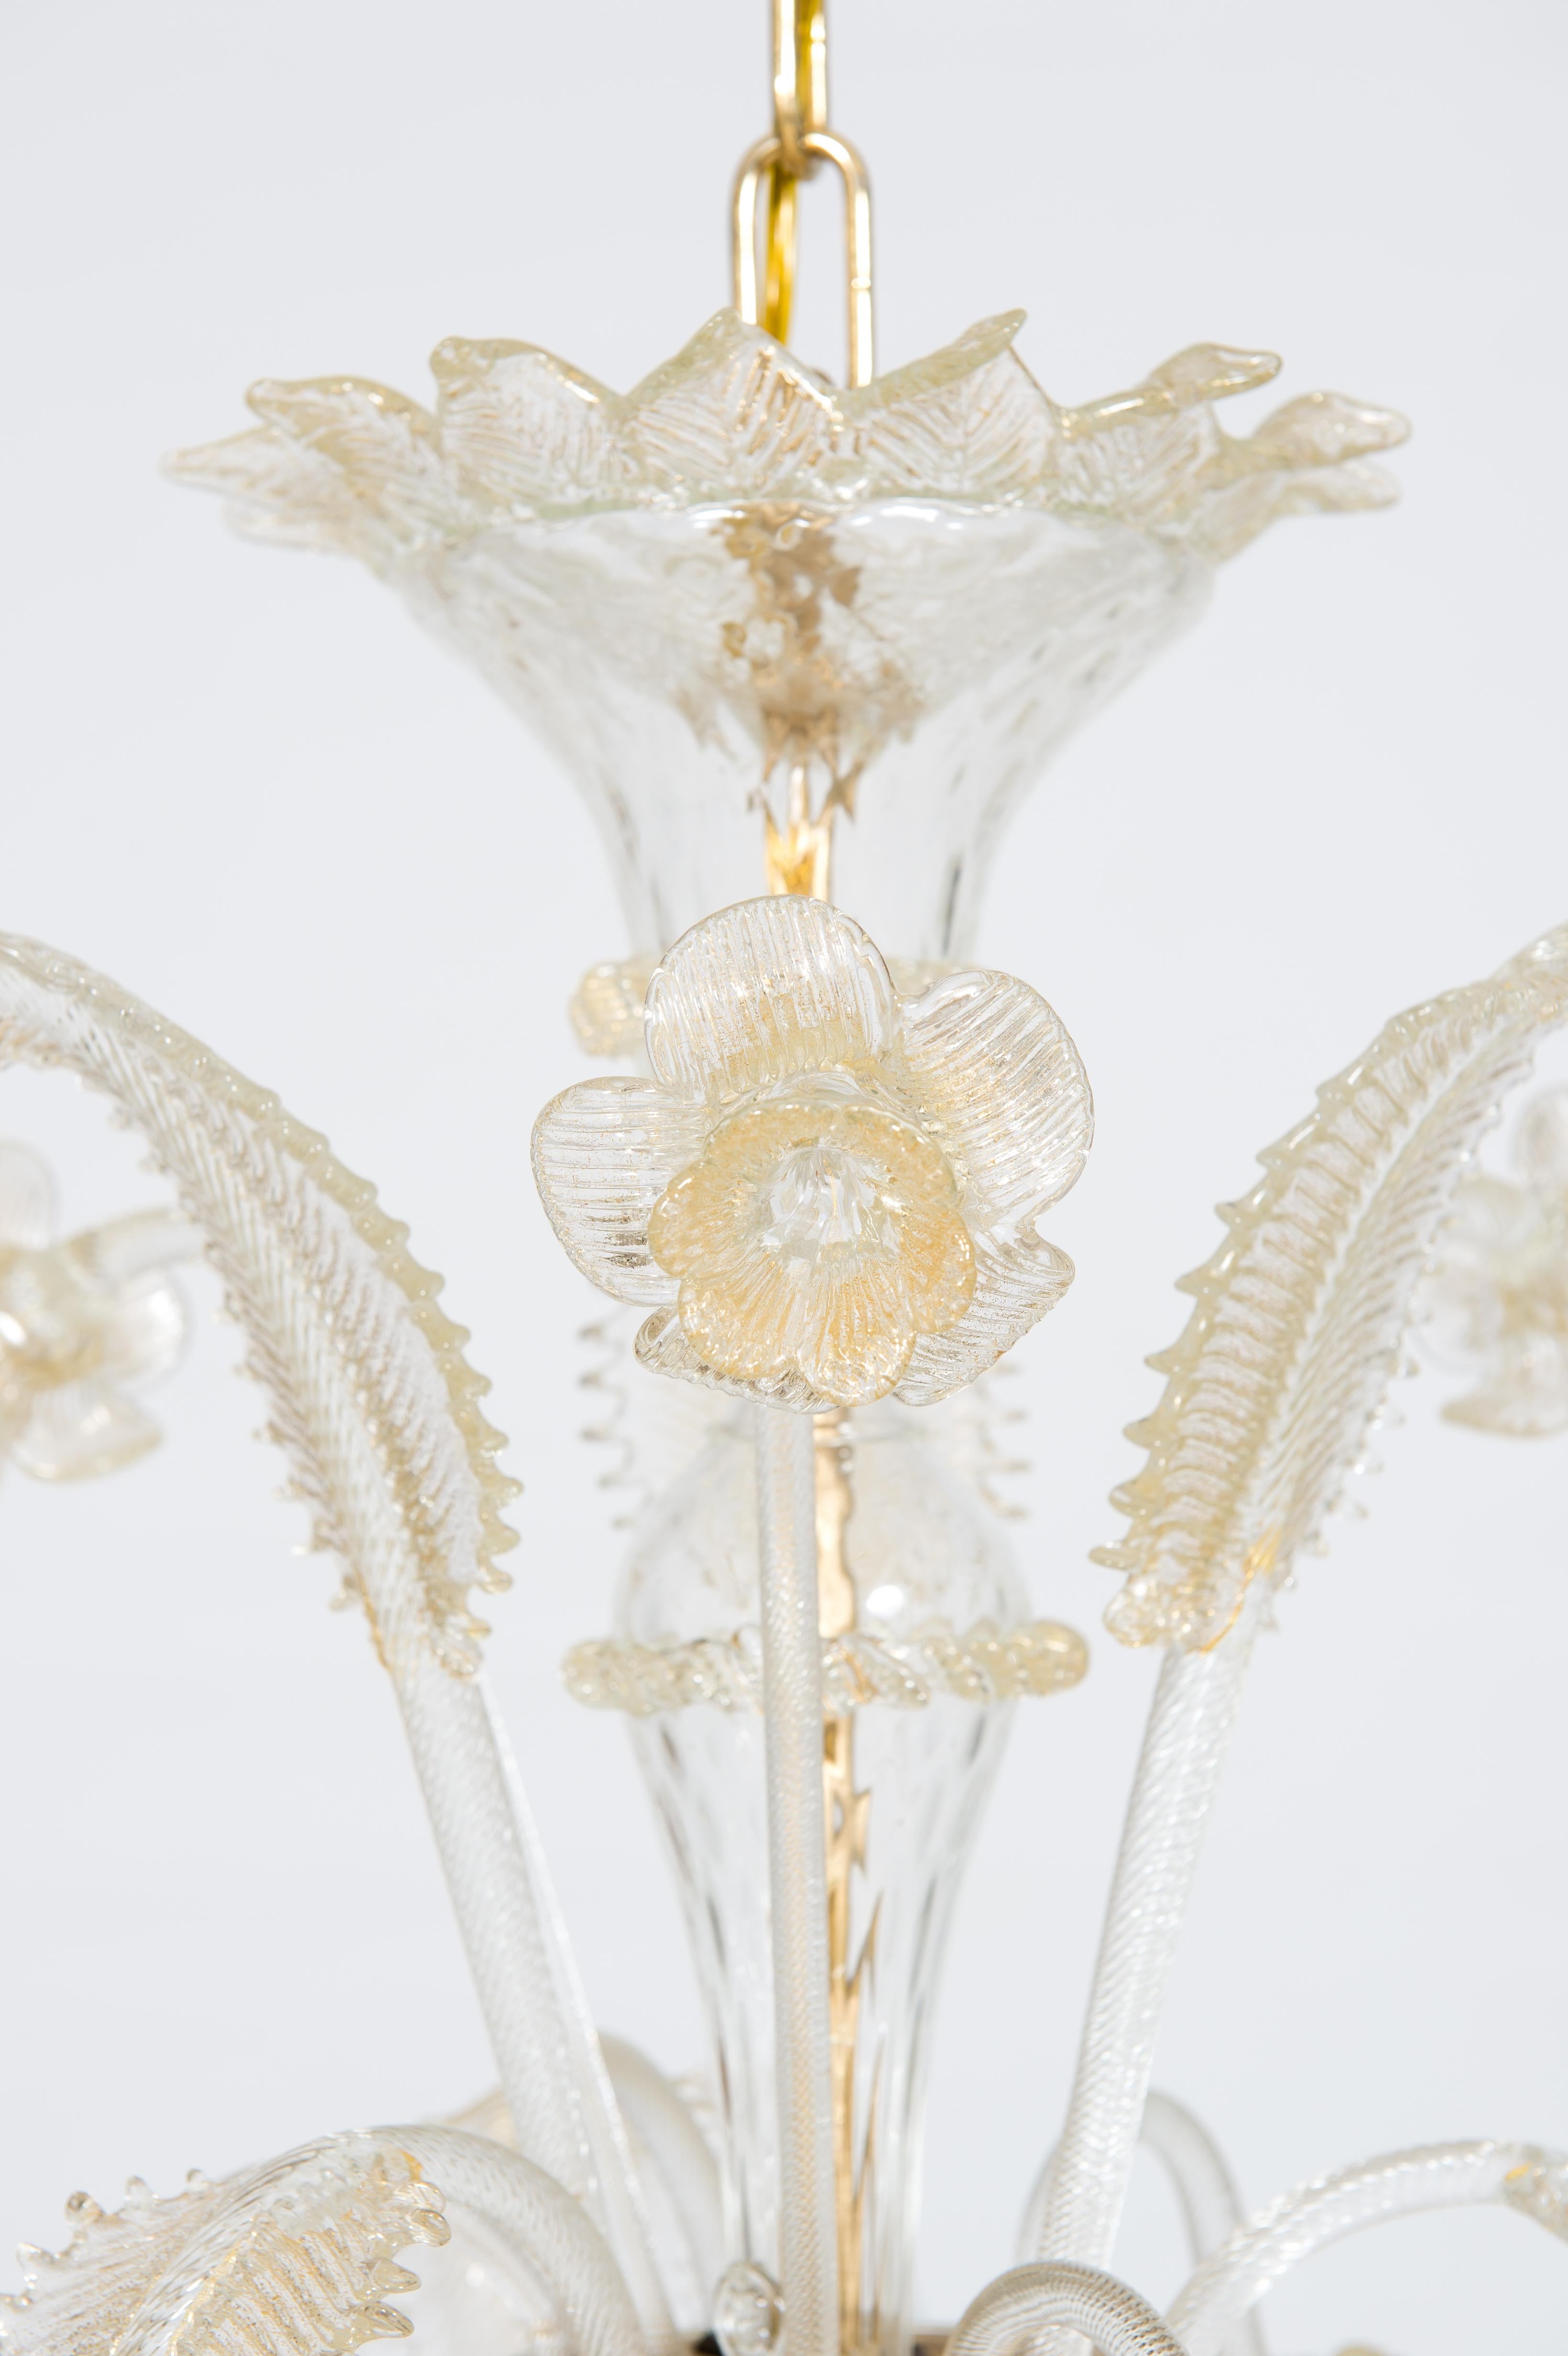 Floral Murano Glass Chandelier with “Riga Dritta” Decorations, 20th Century 7